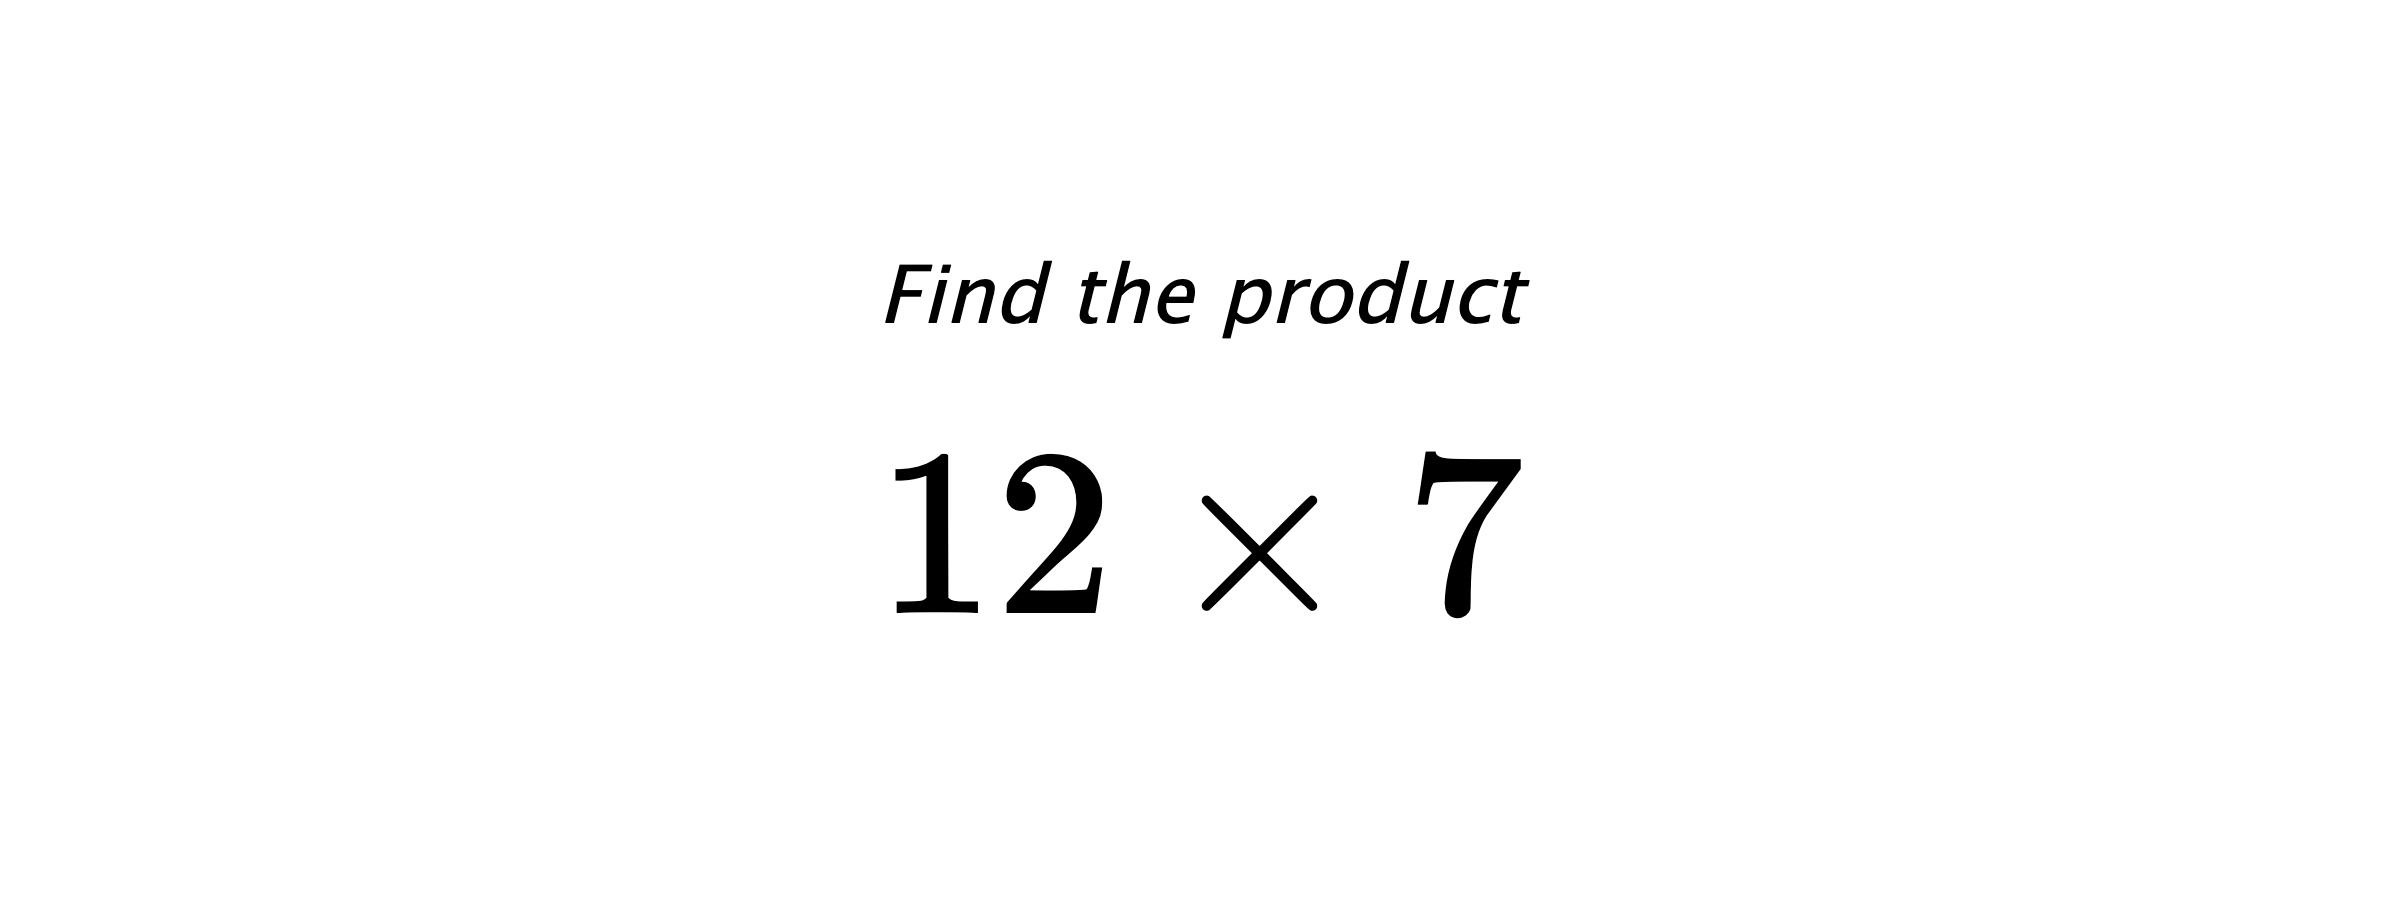 Find the product $ 12 \times 7 $